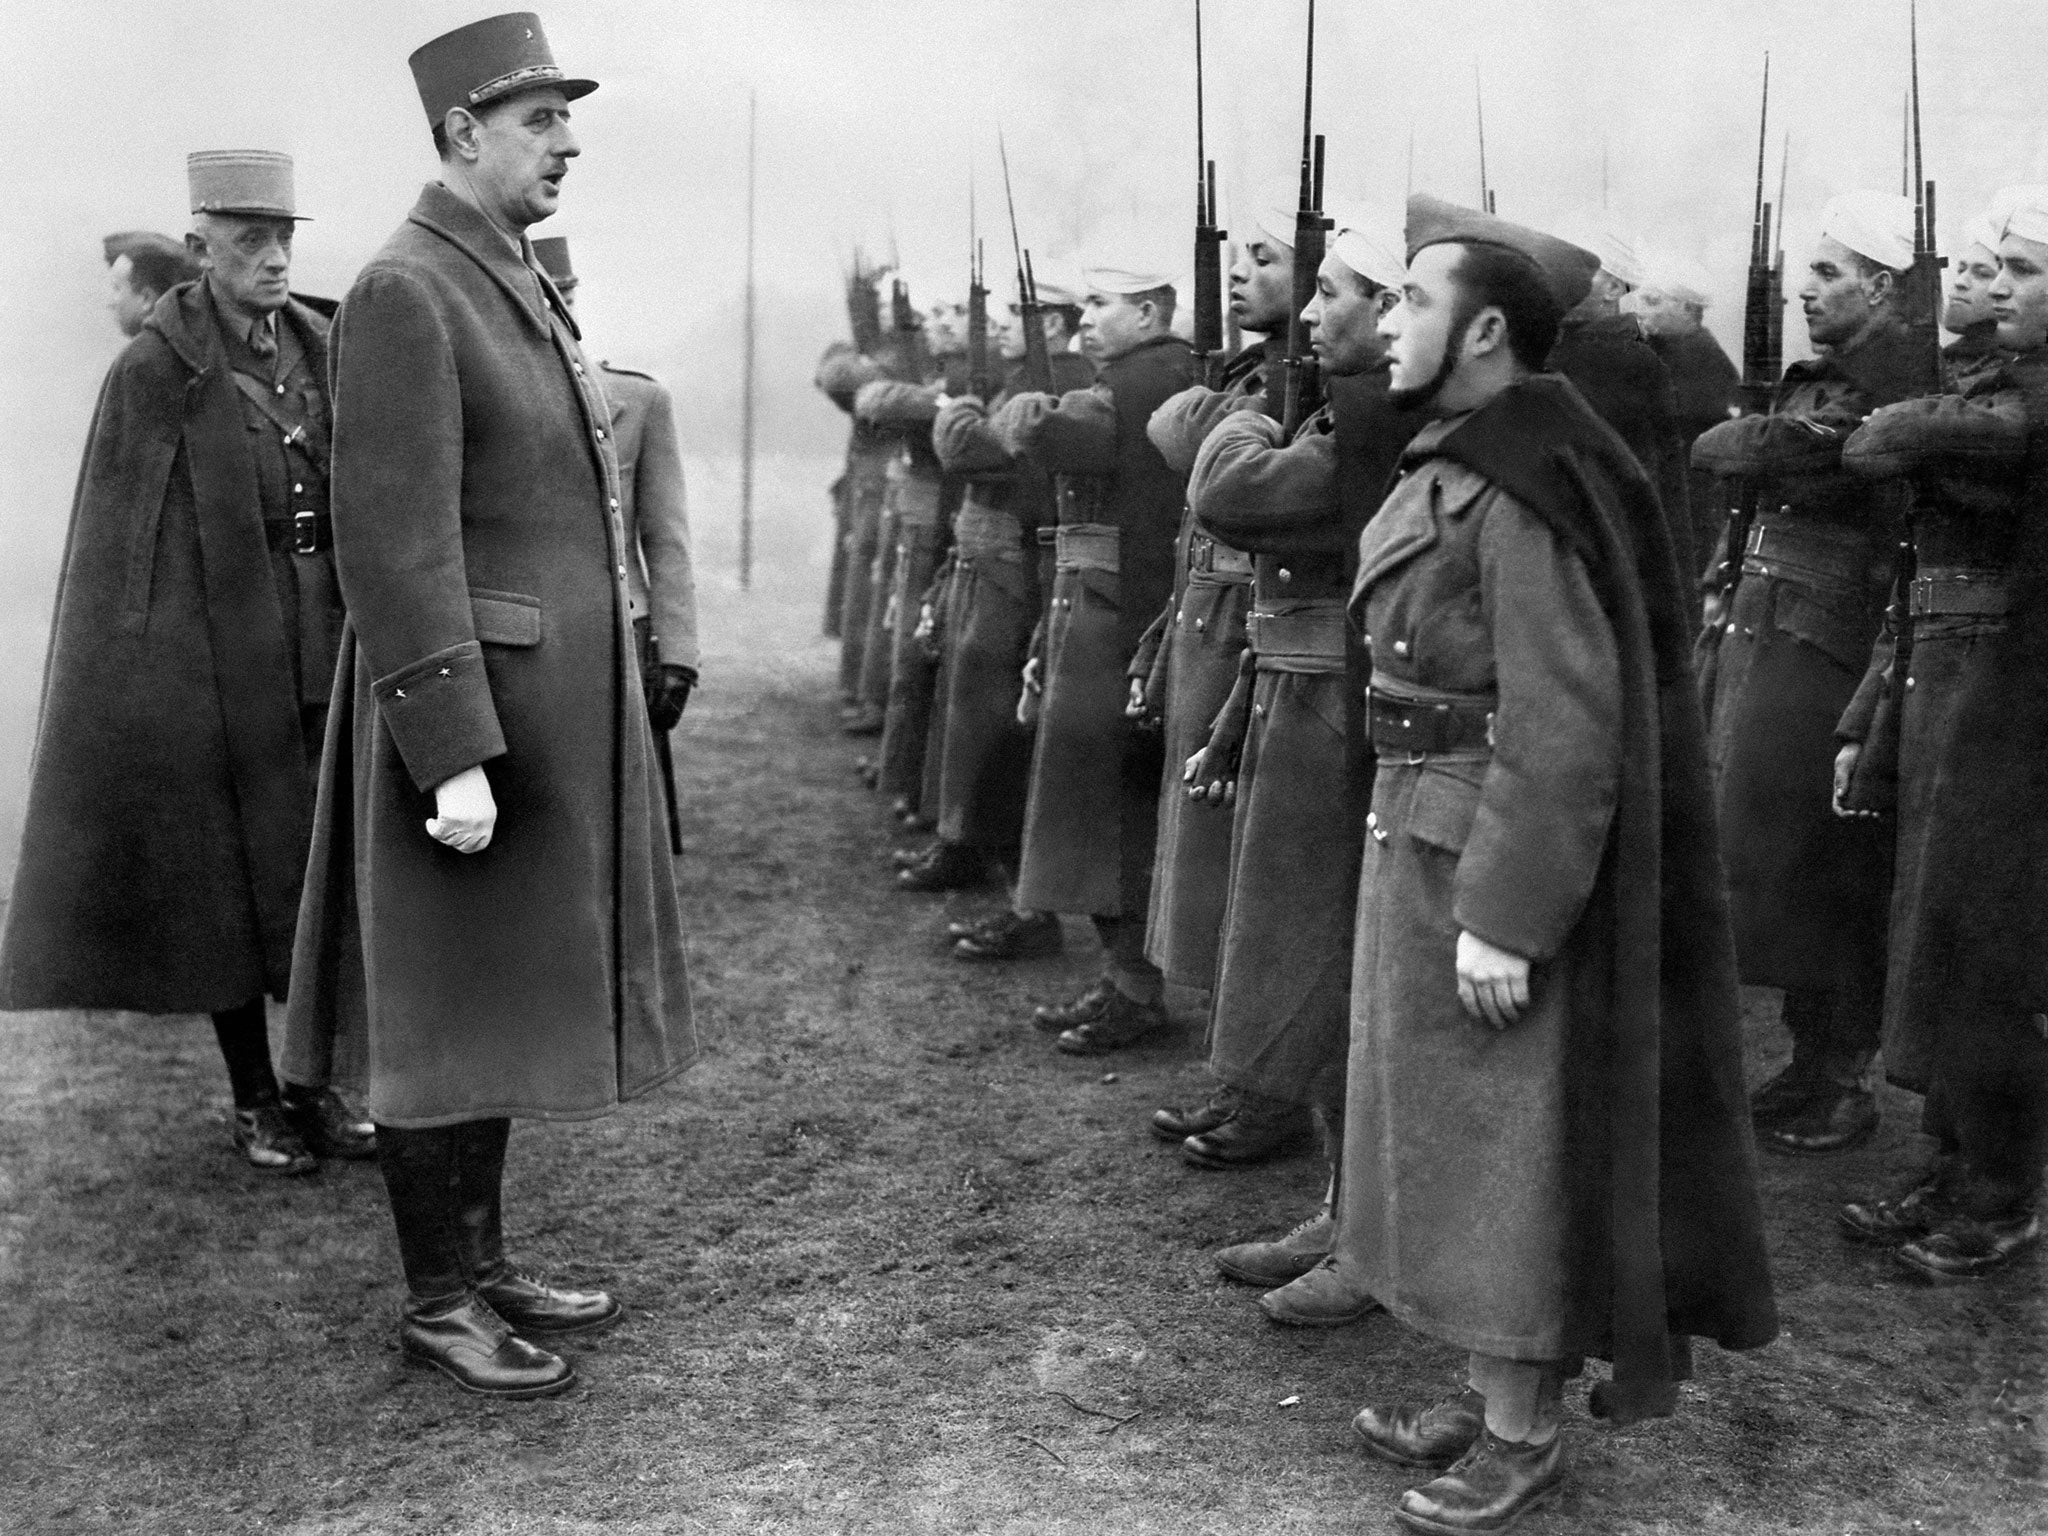 'Charles de Gaulle, Chief of the French Free Forces, inspects the French colonial troops during during his visit of a military base in Great Britain, 1941'